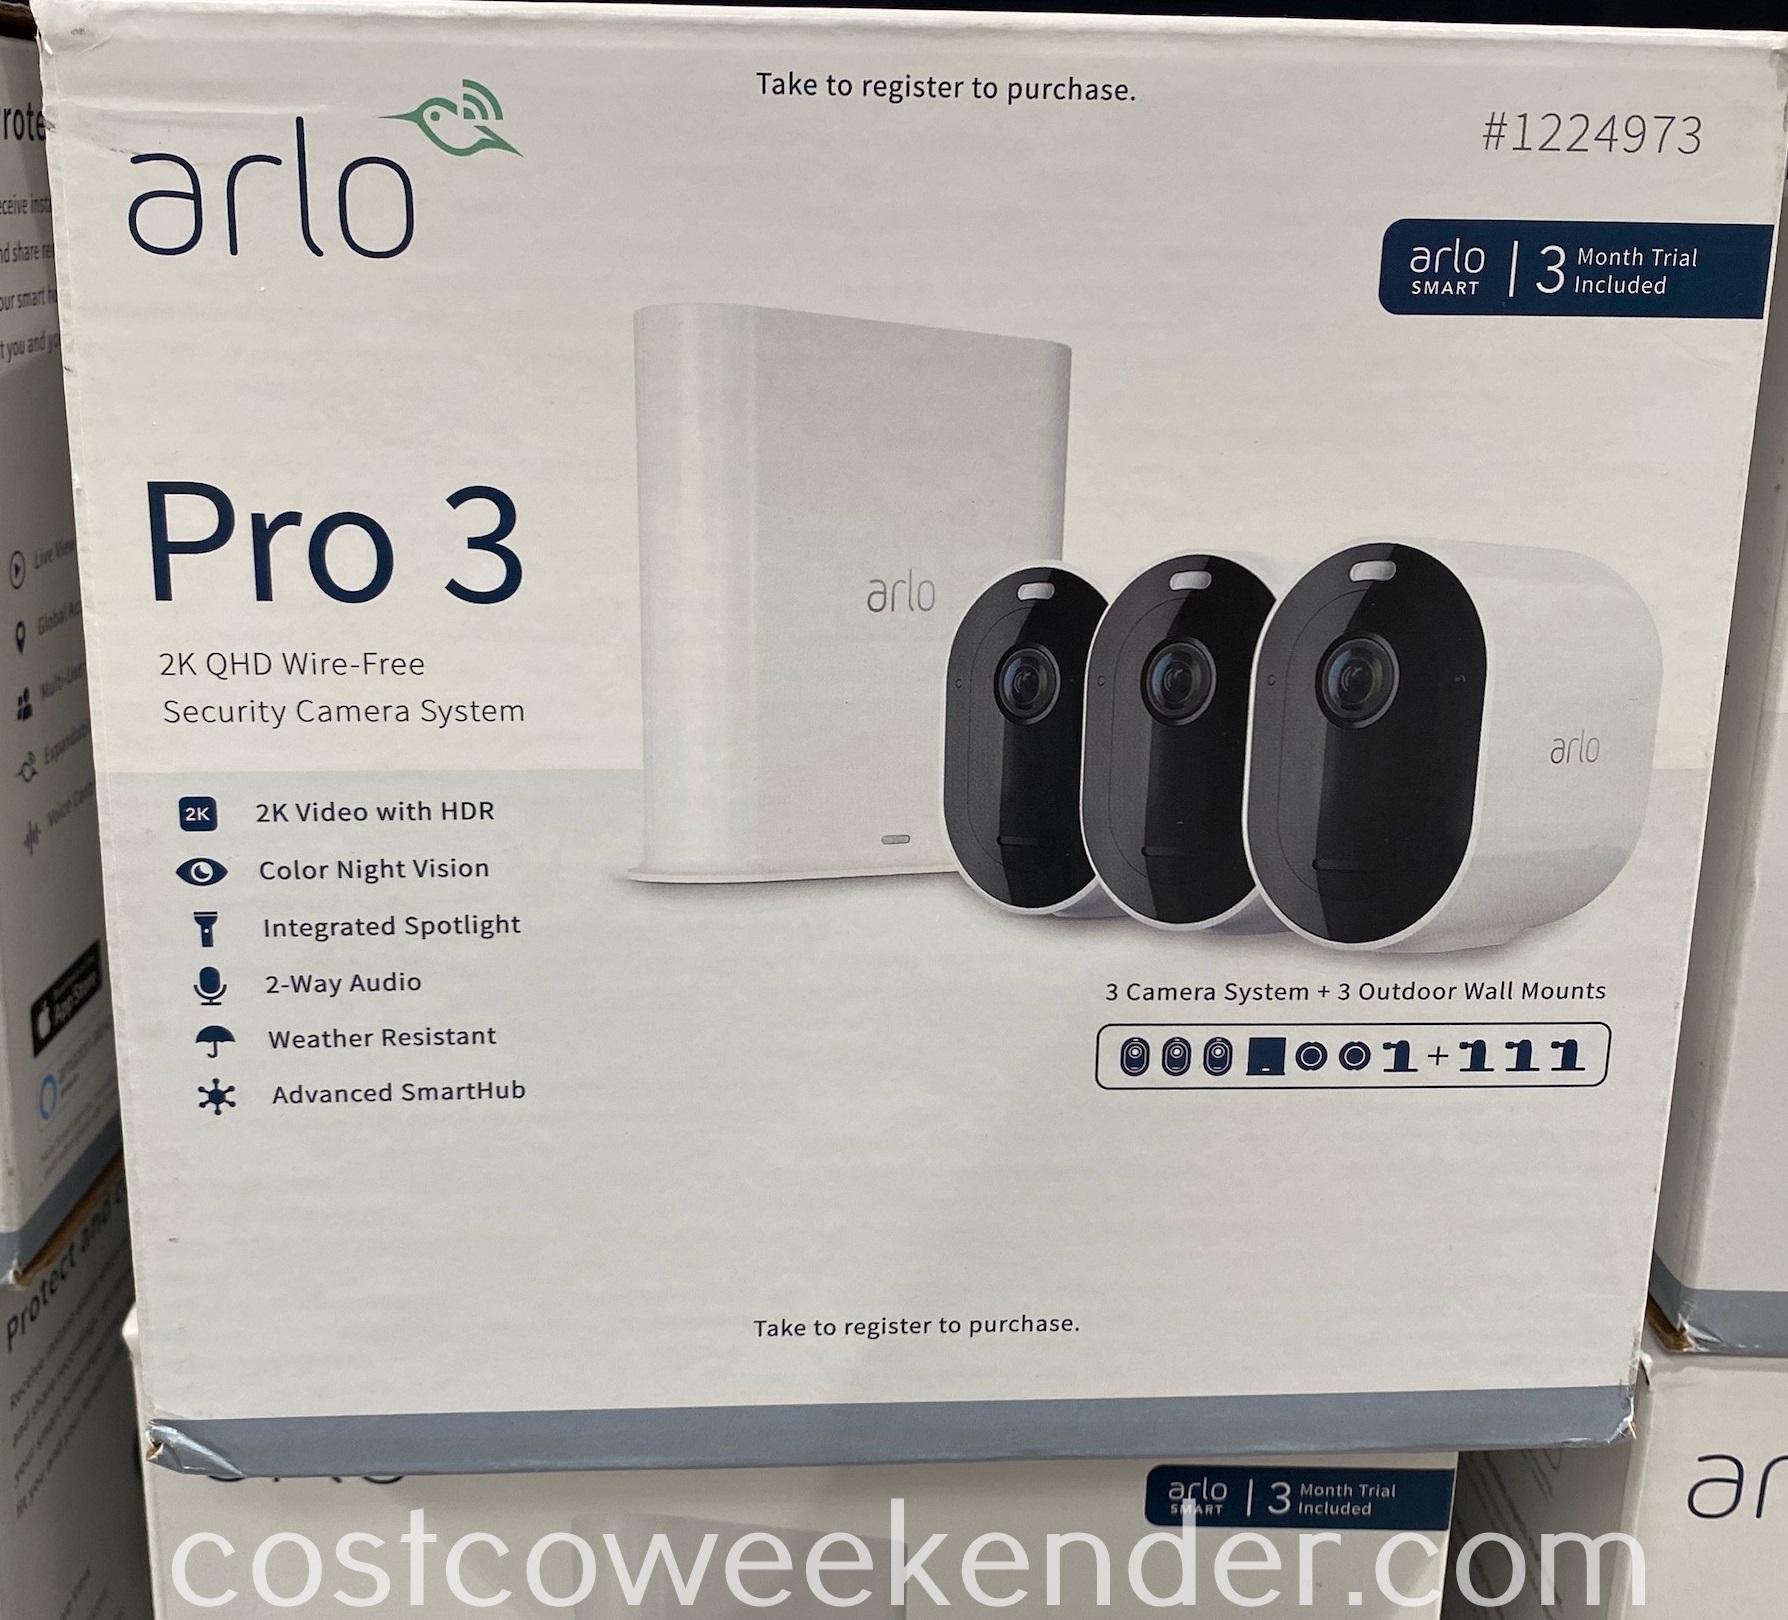 Arlo Pro 3 2K QHD WireFree Security Camera System Costco Weekender